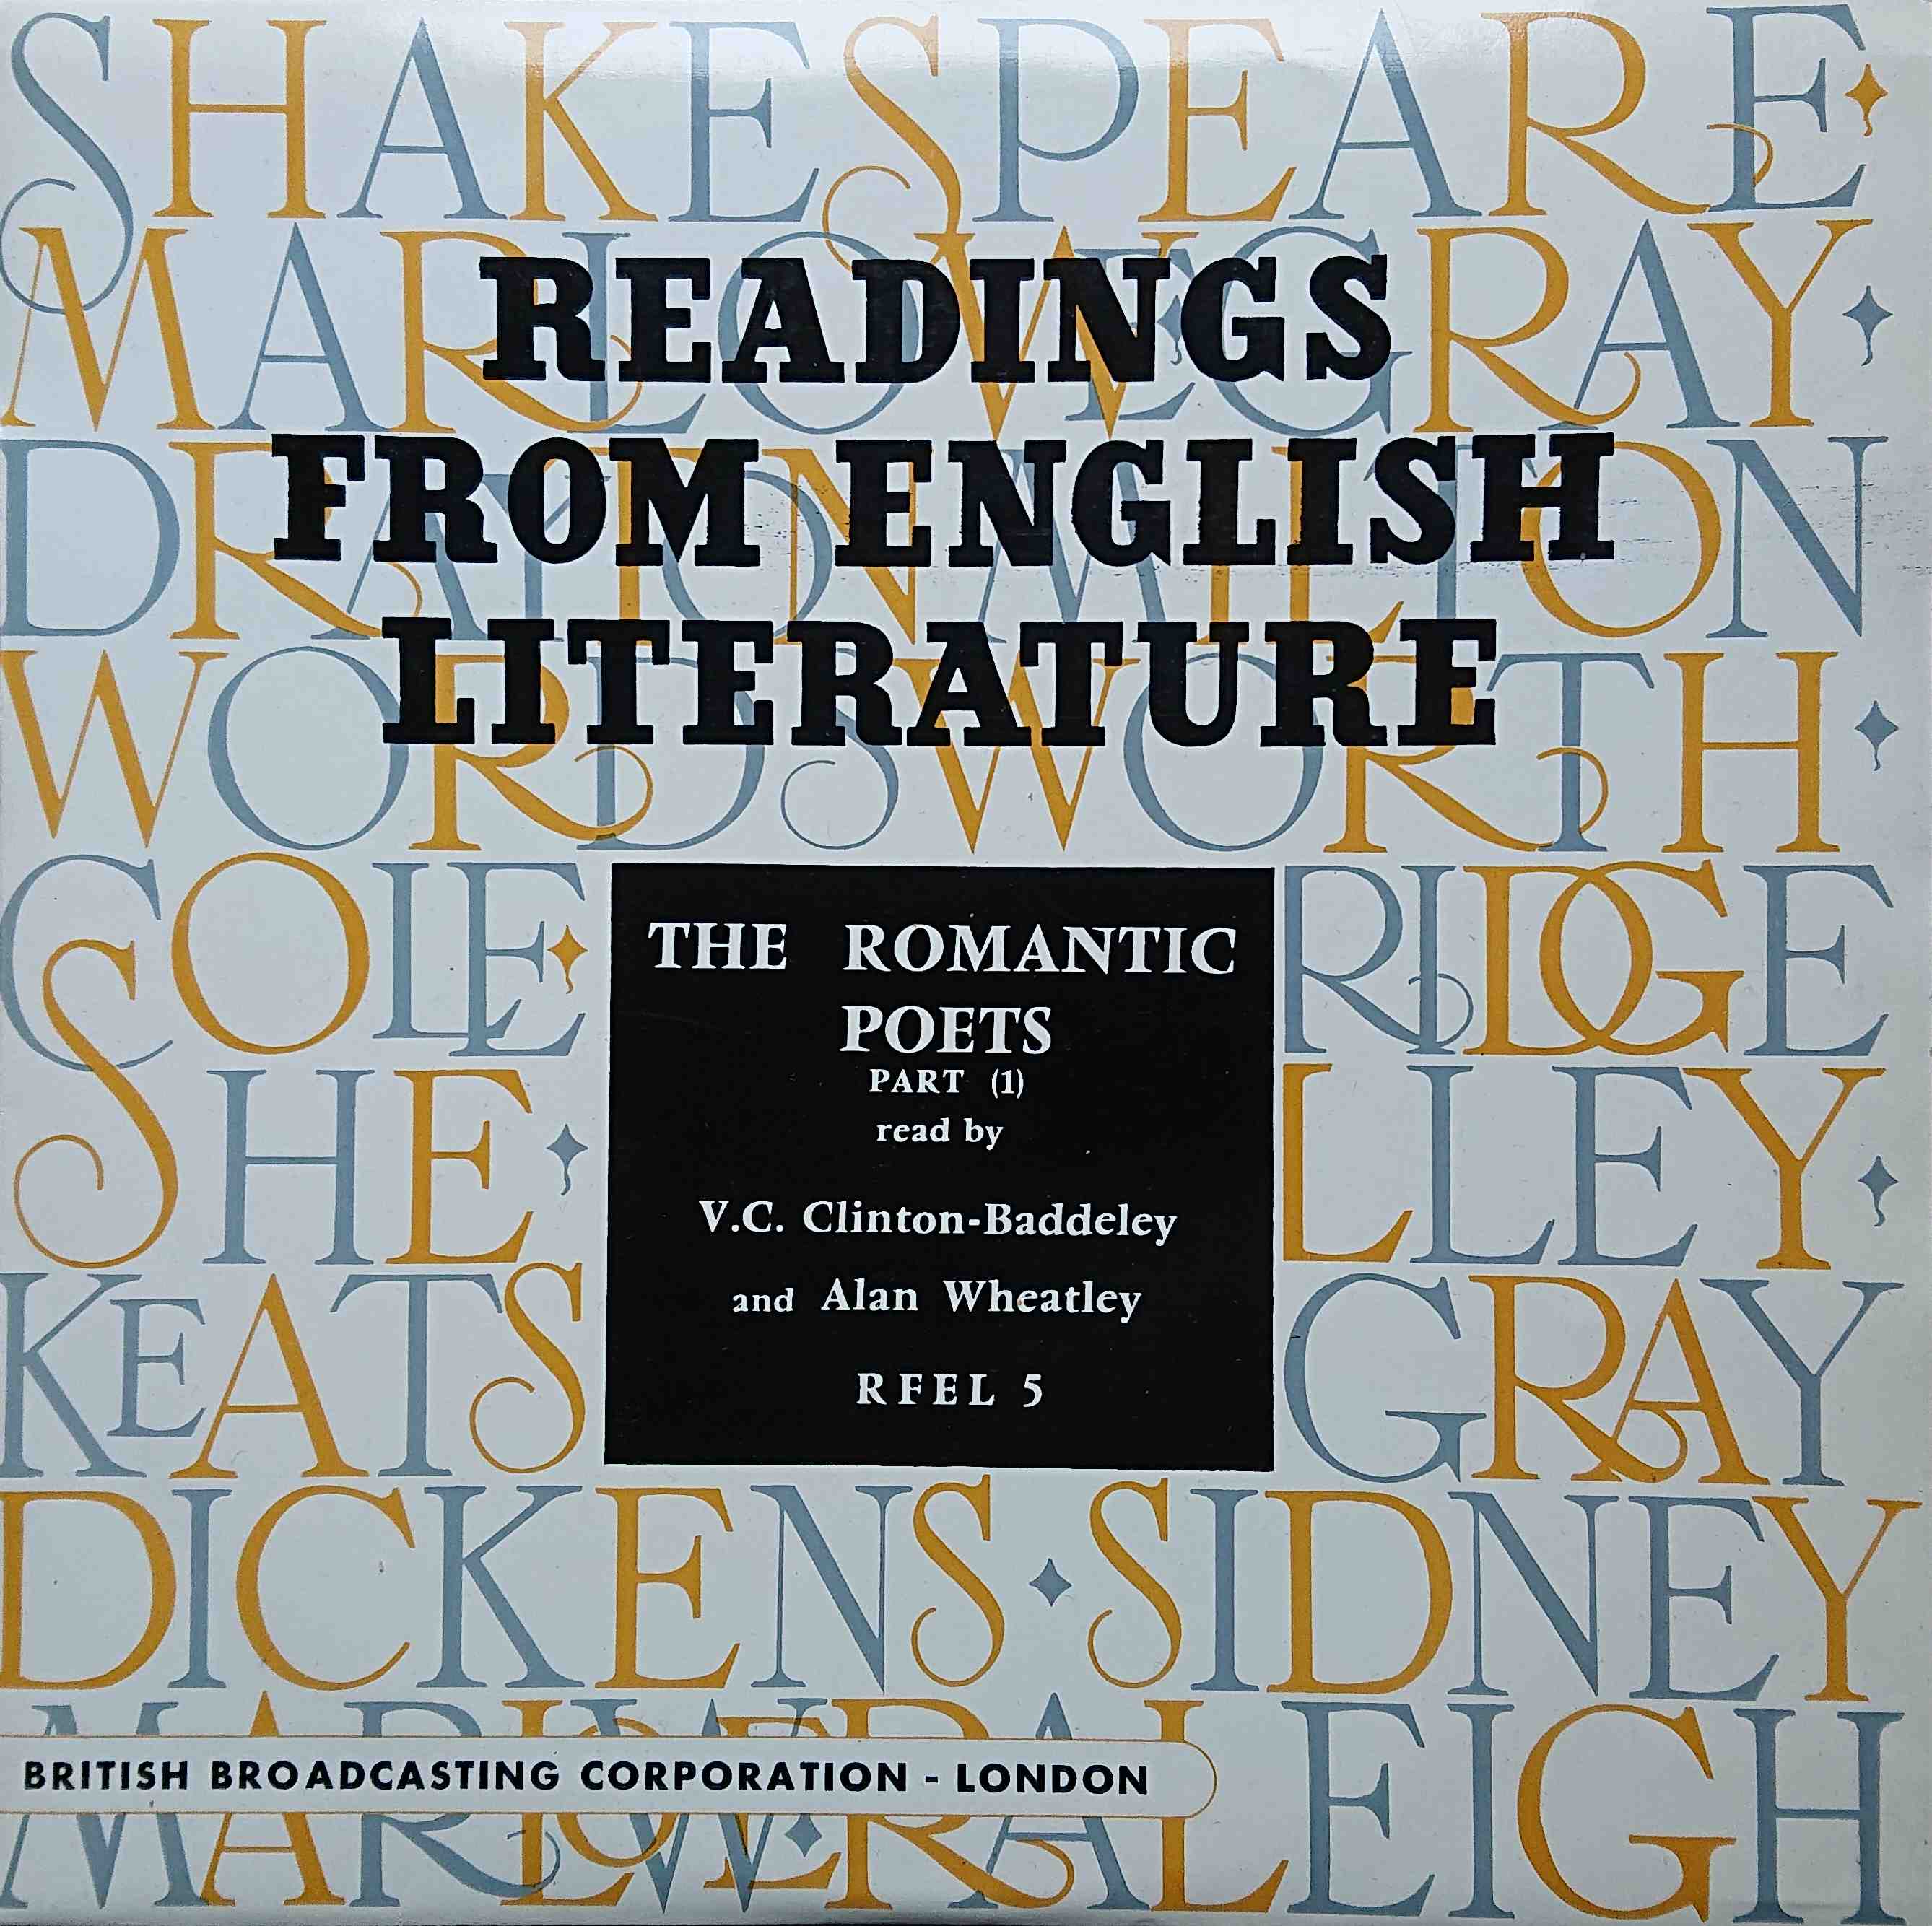 Picture of The Romantic Poets Part (1) by artist V. C. Clinton-Baddeley / Alan Wheatley from the BBC 10inches - Records and Tapes library